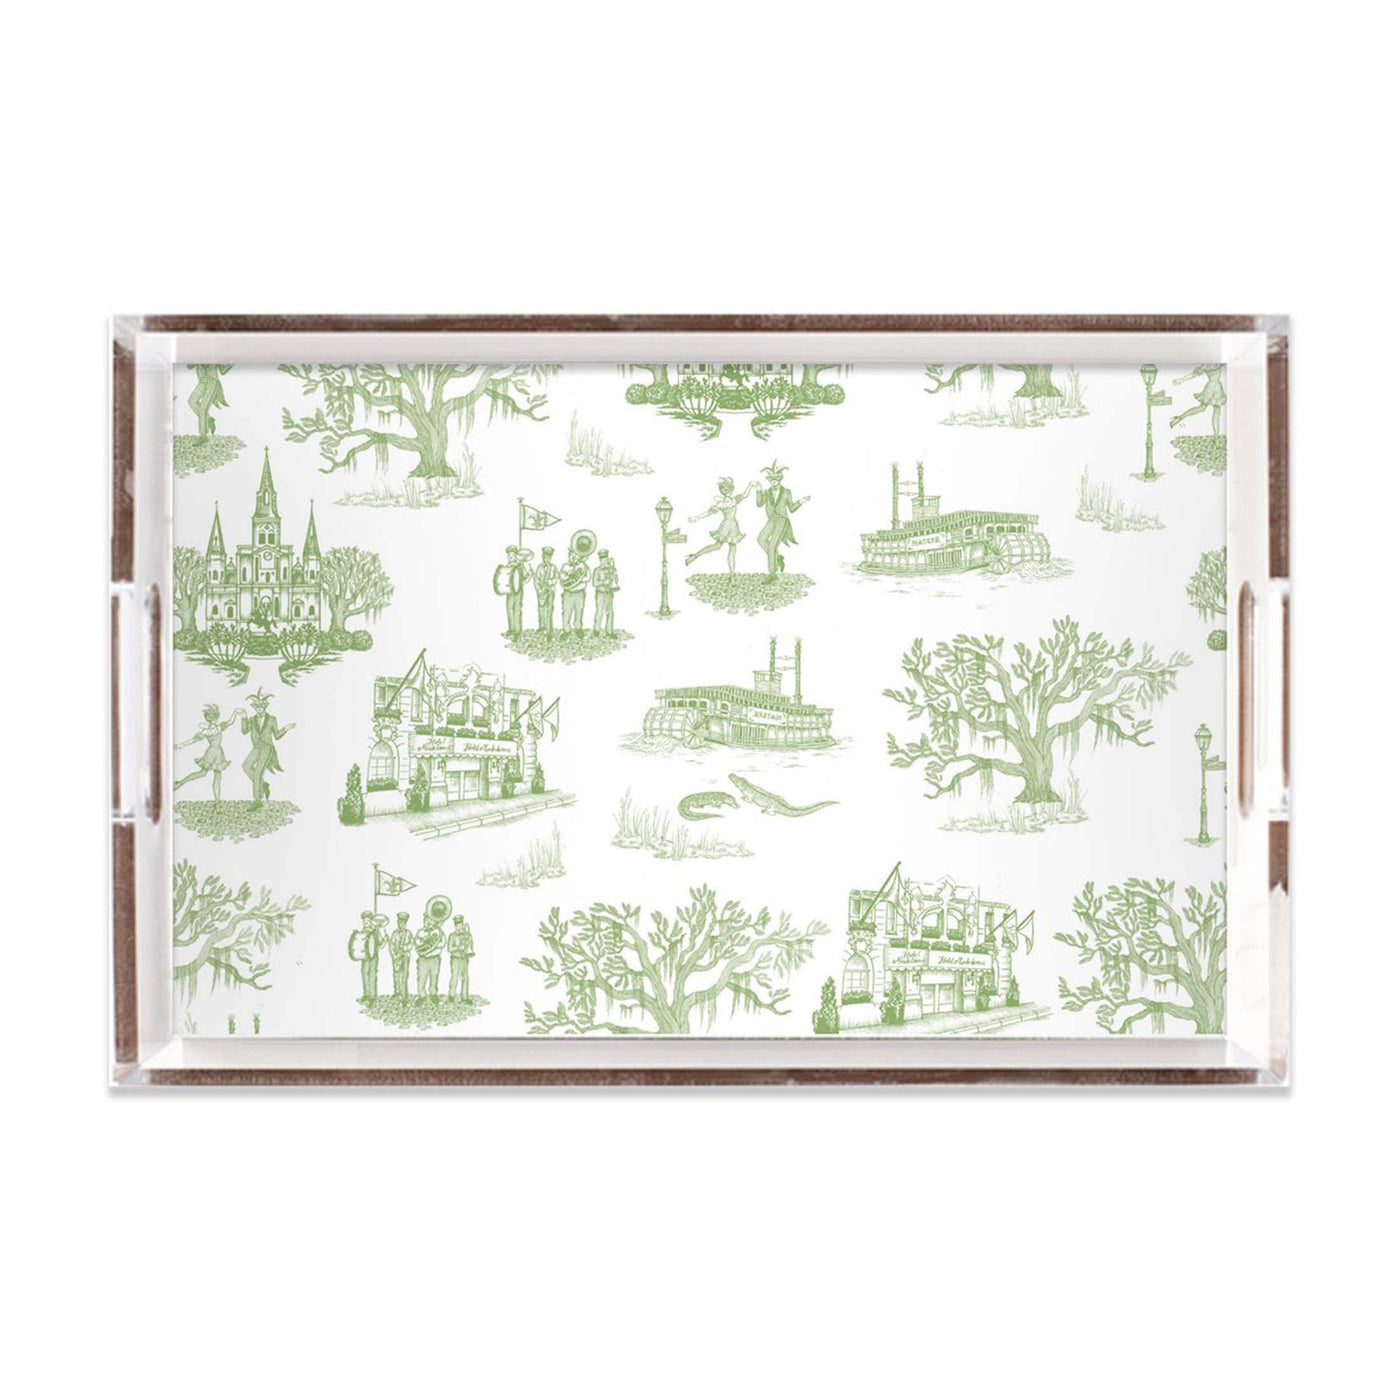 Lucite Trays Green / 11x17 New Orleans Toile Lucite Tray Katie Kime